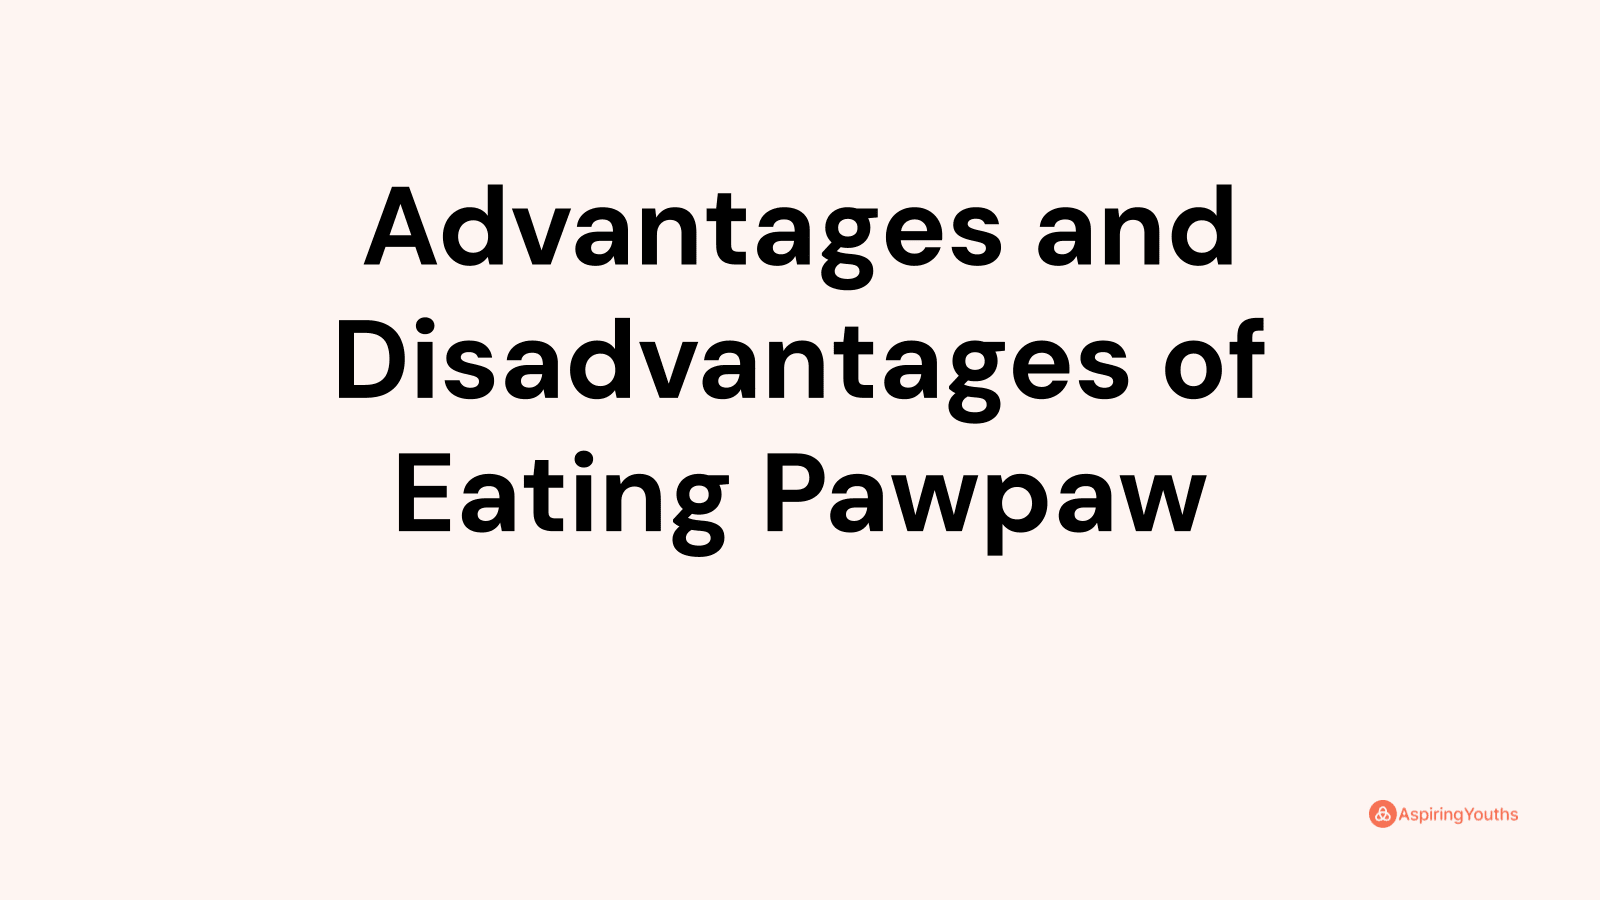 Advantages and disadvantages of Eating Pawpaw